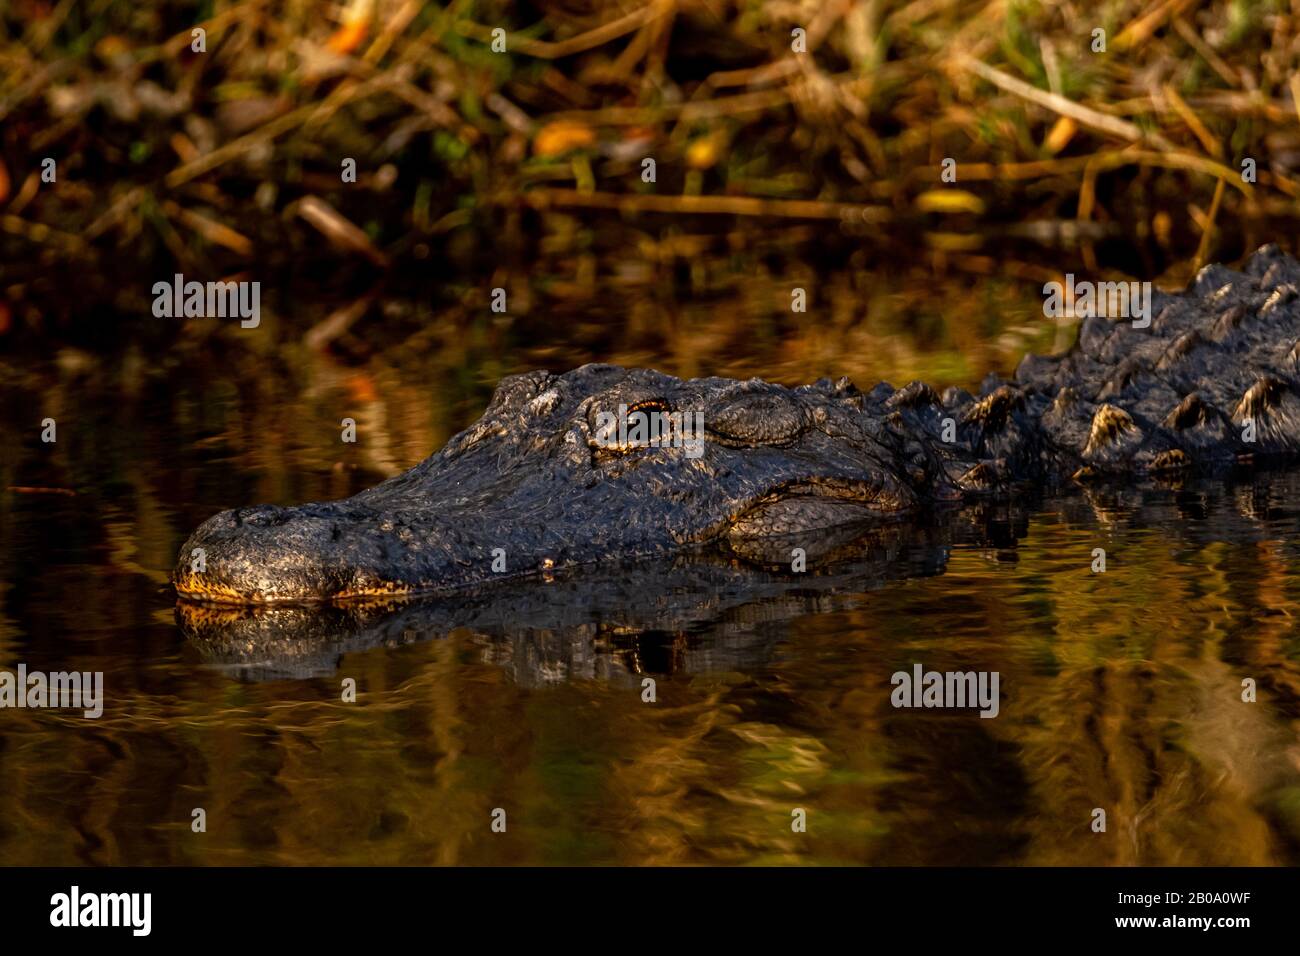 Close up of an adult American alligator (Alligator mississippiensis) waiting for prey to come by in the waters of Merritt Island, Florida. Stock Photo